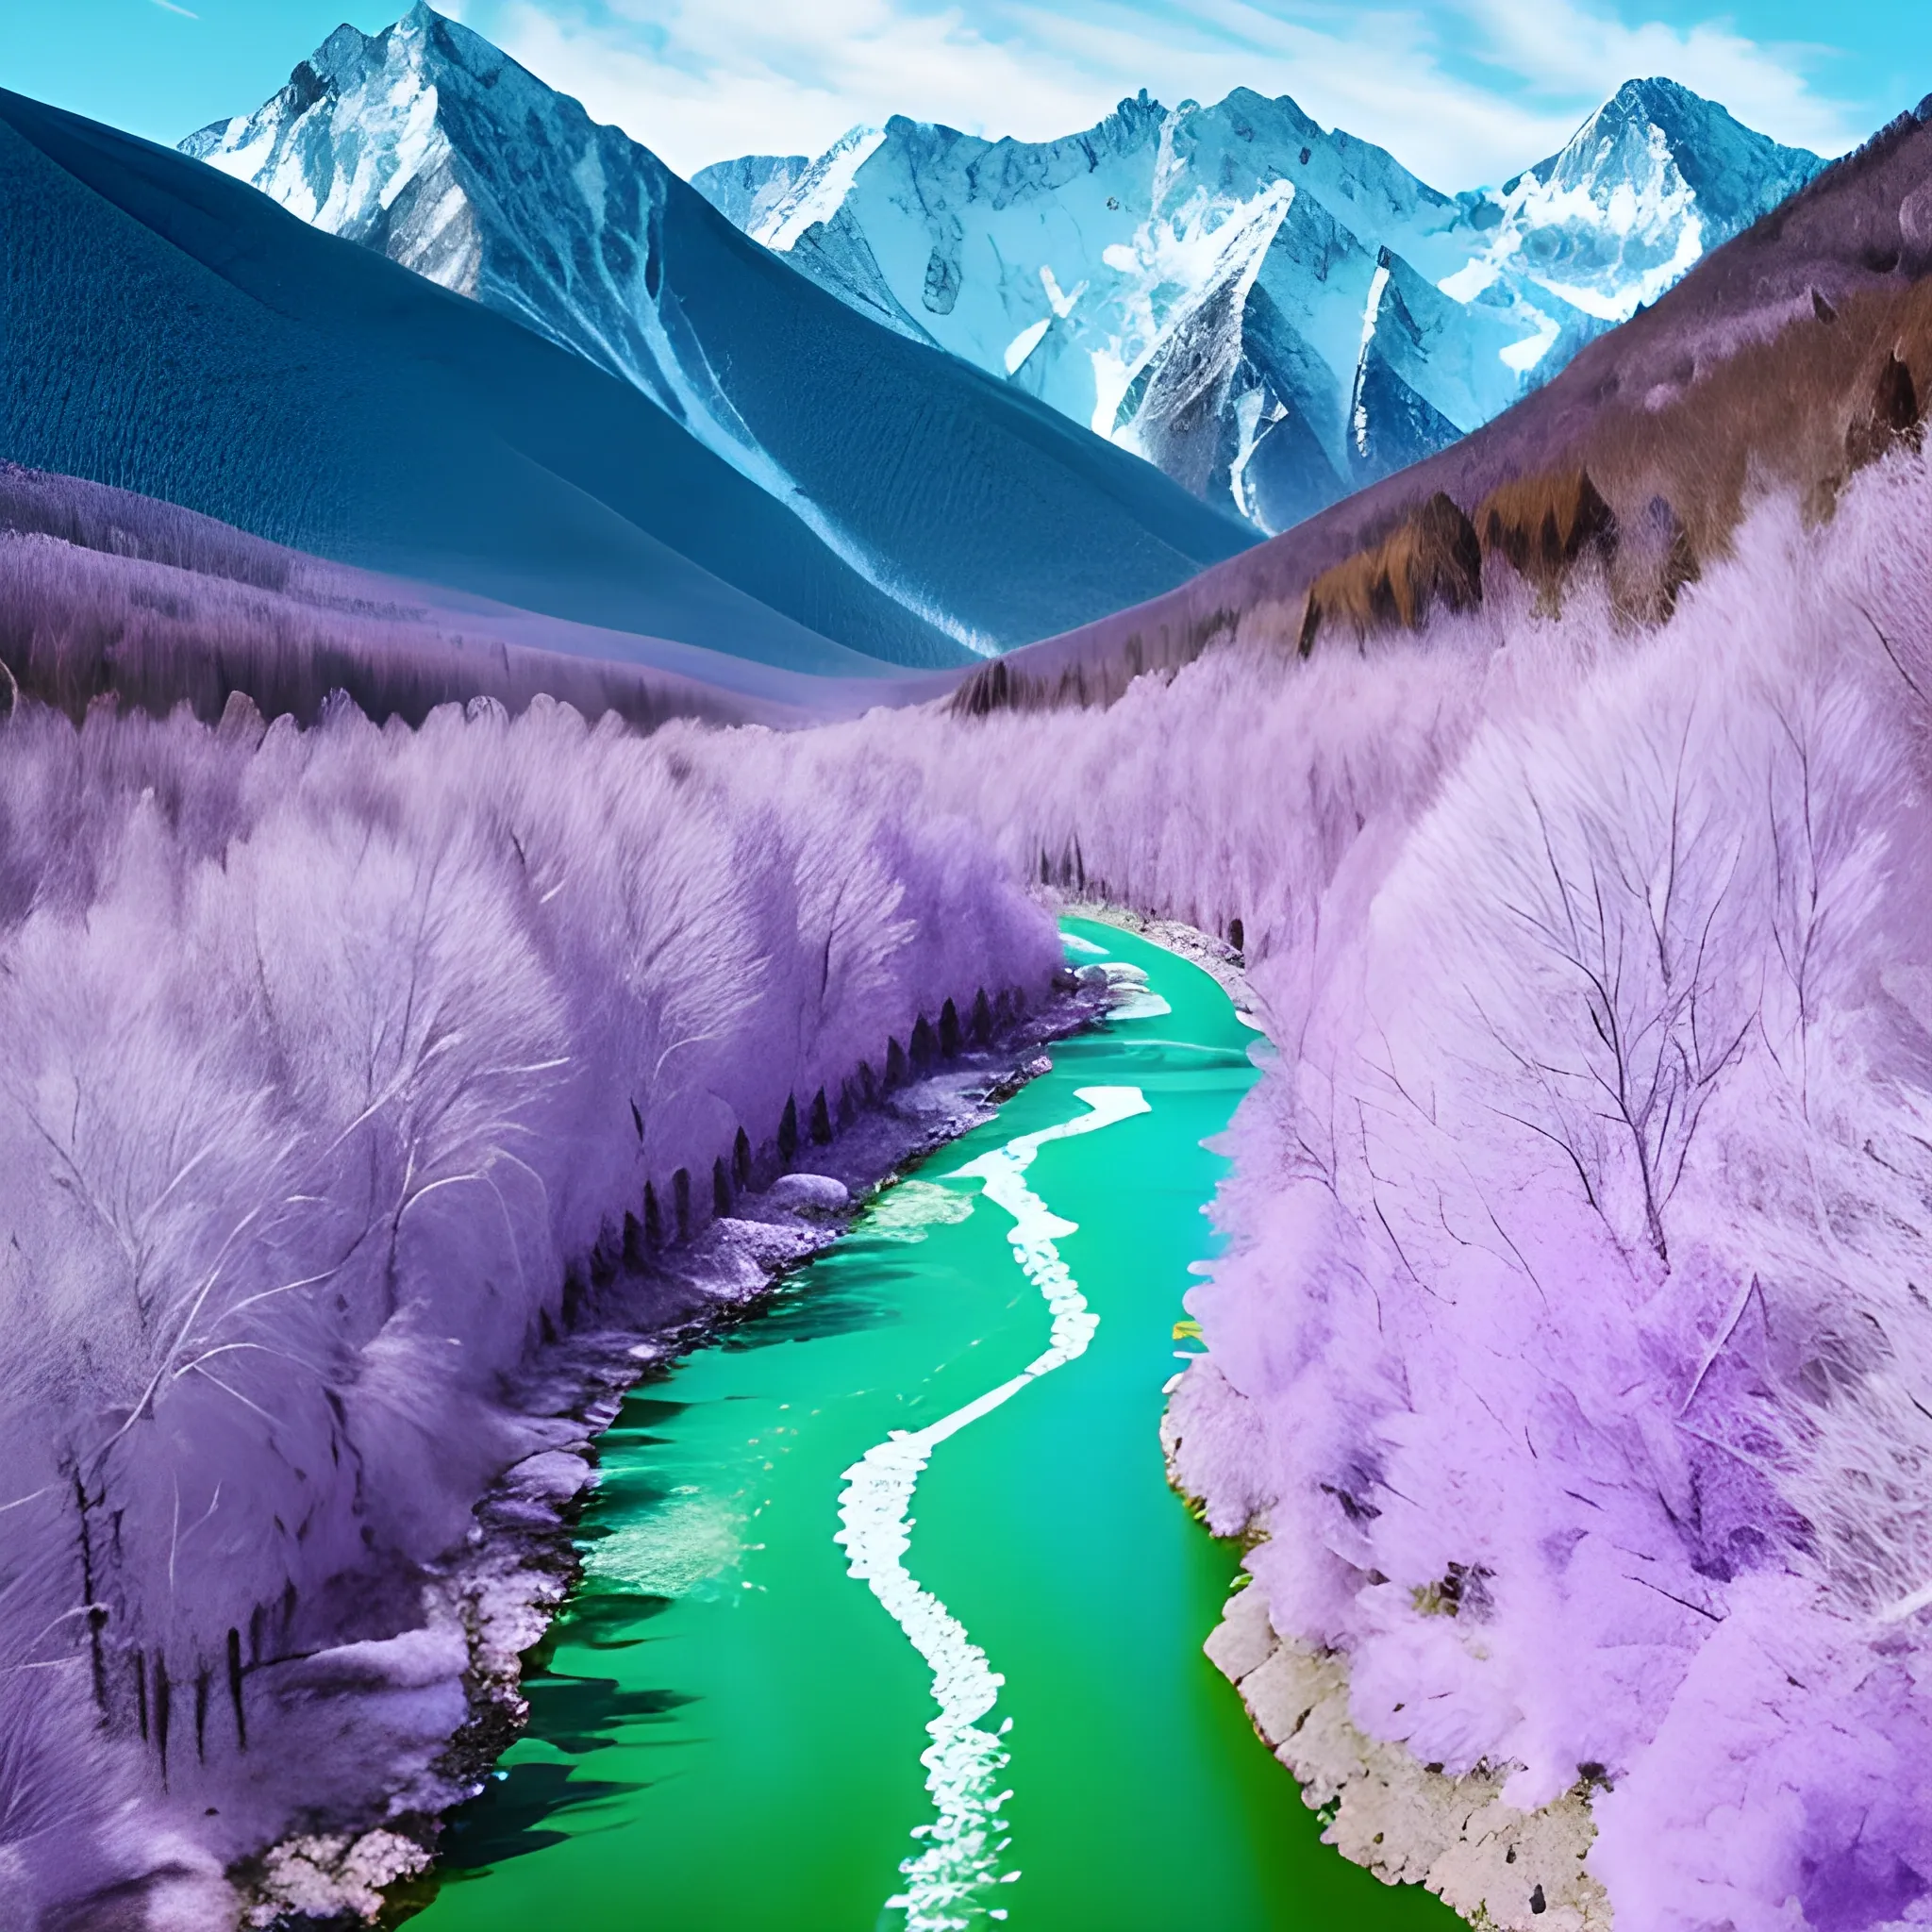 birds are flying, the mountains are covered with bright green trees and snow, a blue-purple river flows near the mountains